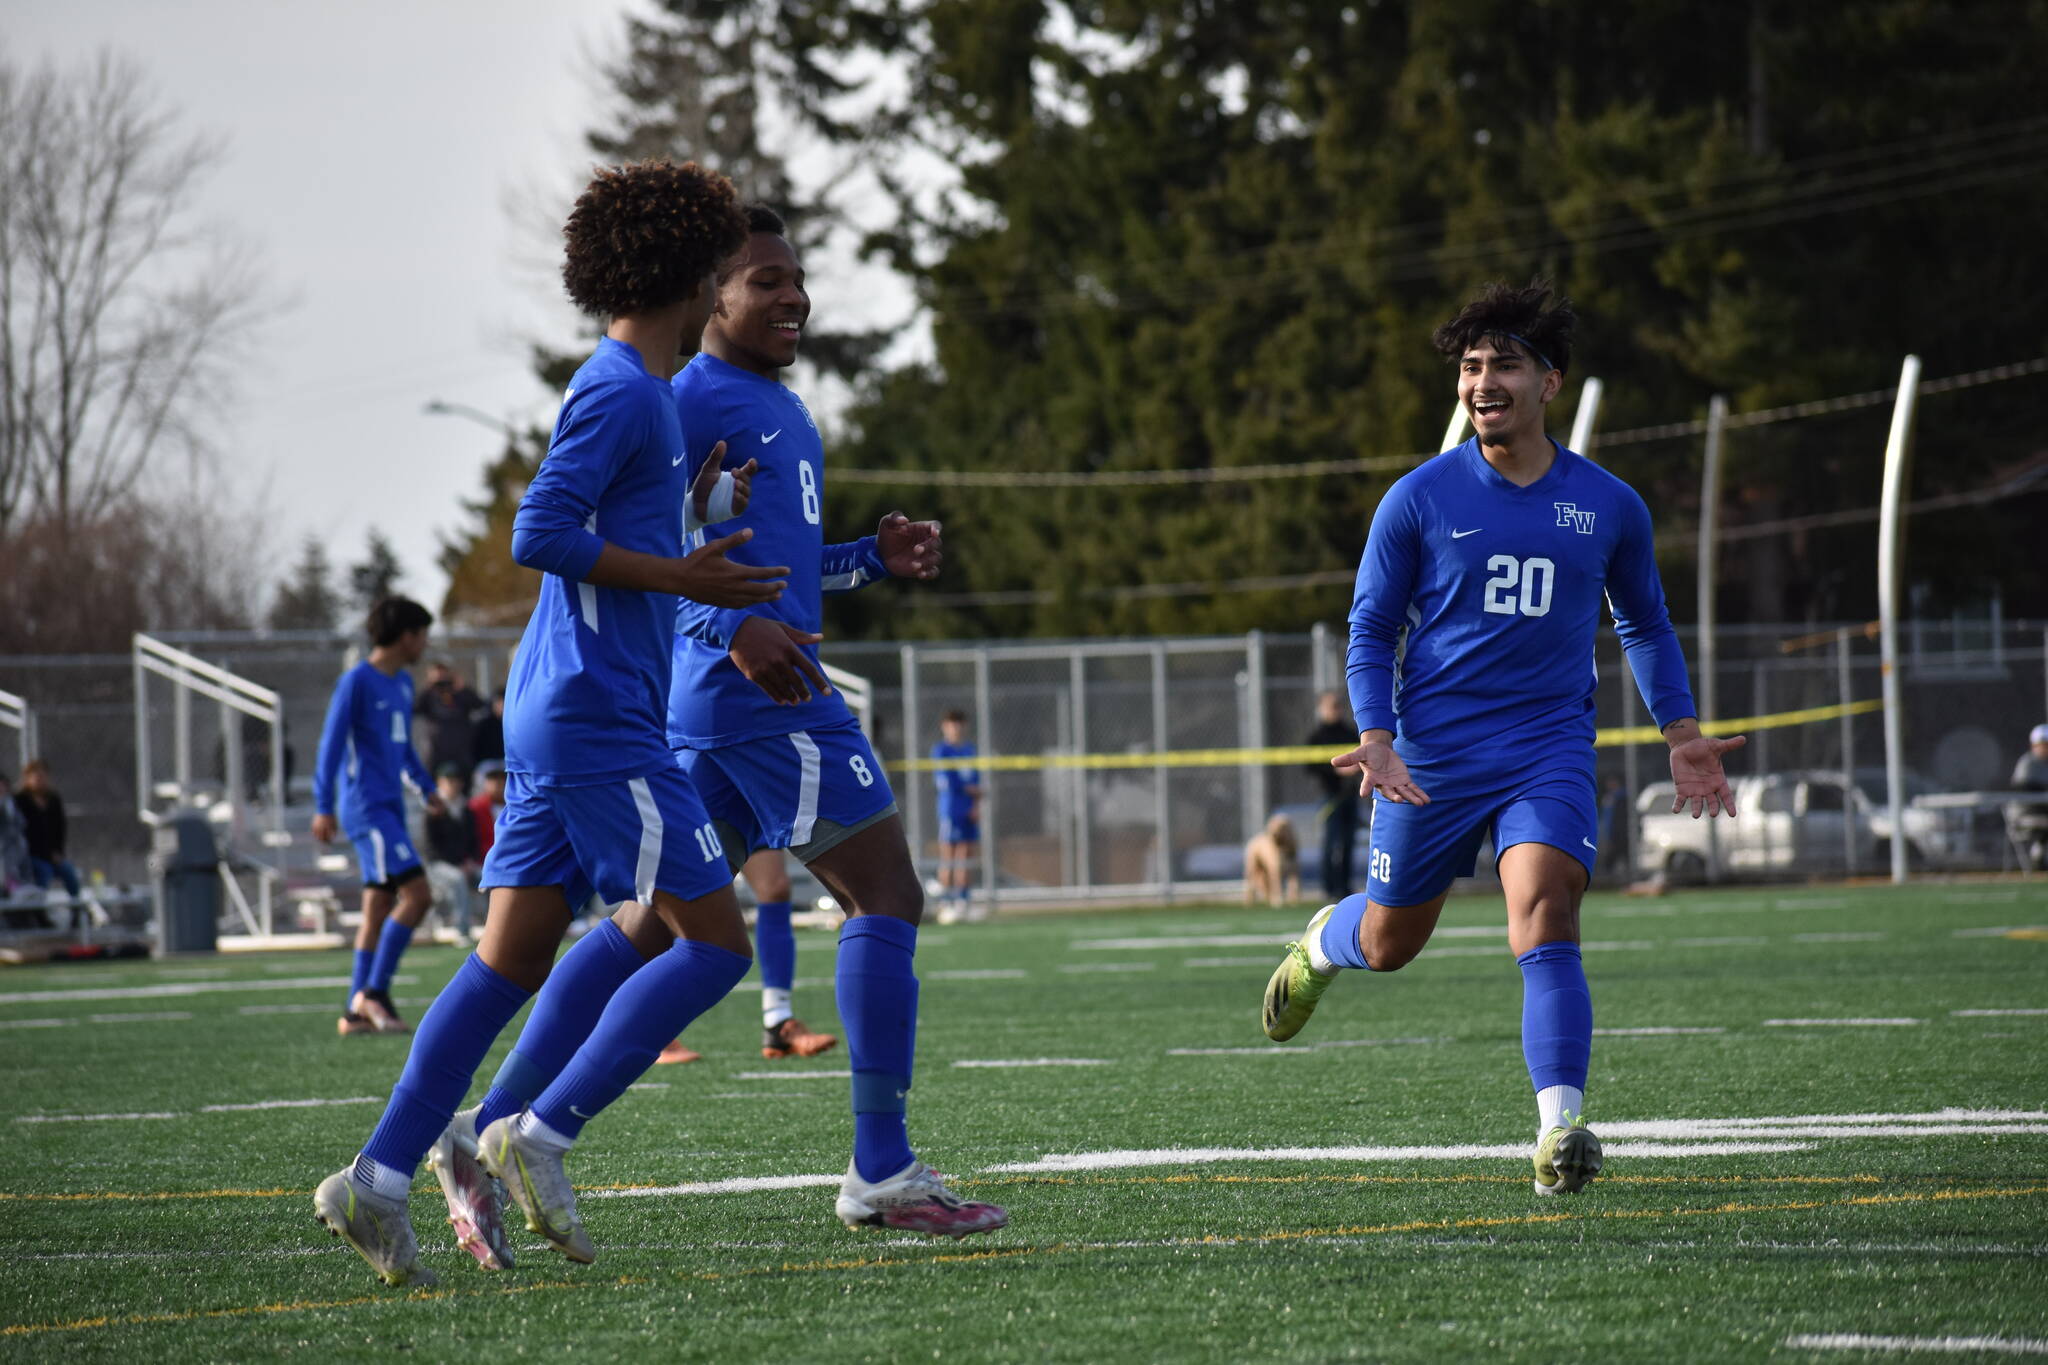 Ben Ray / The Mirror
Eagles celebrate after Nehemeya Mekonnen scored Federal Way’s fourth goal of the day.